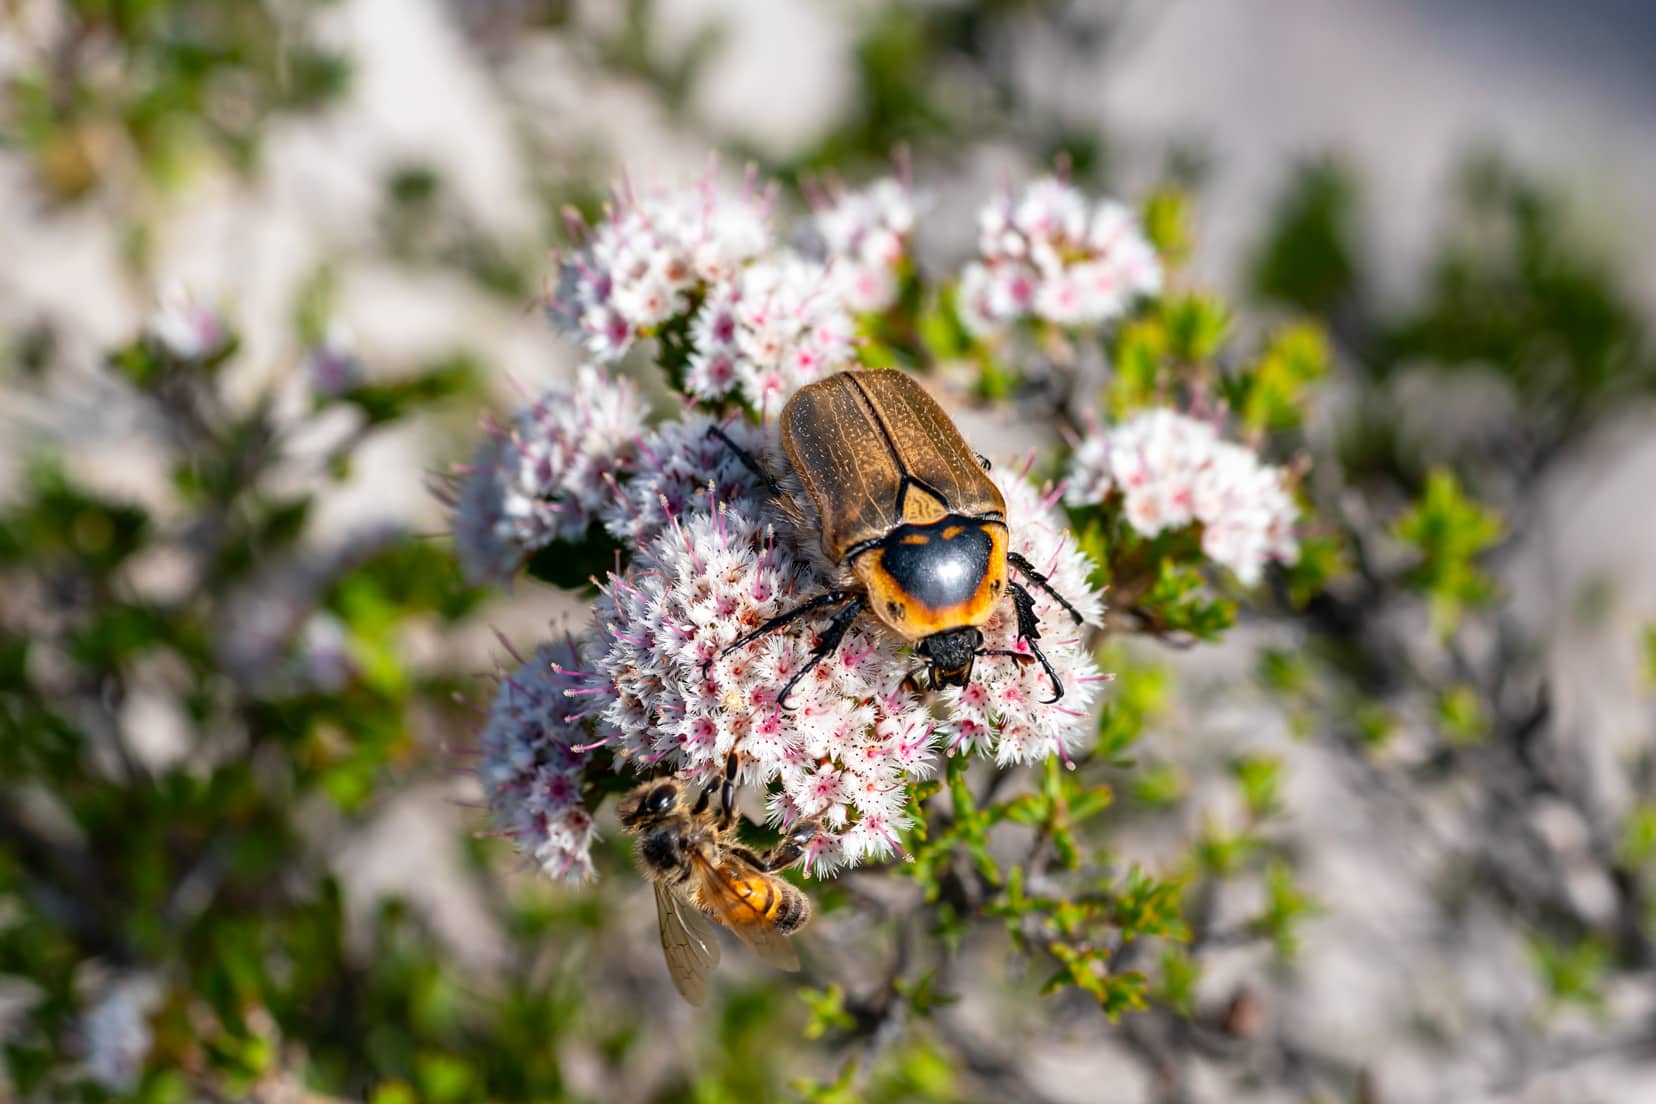 A brown beetle on a flower